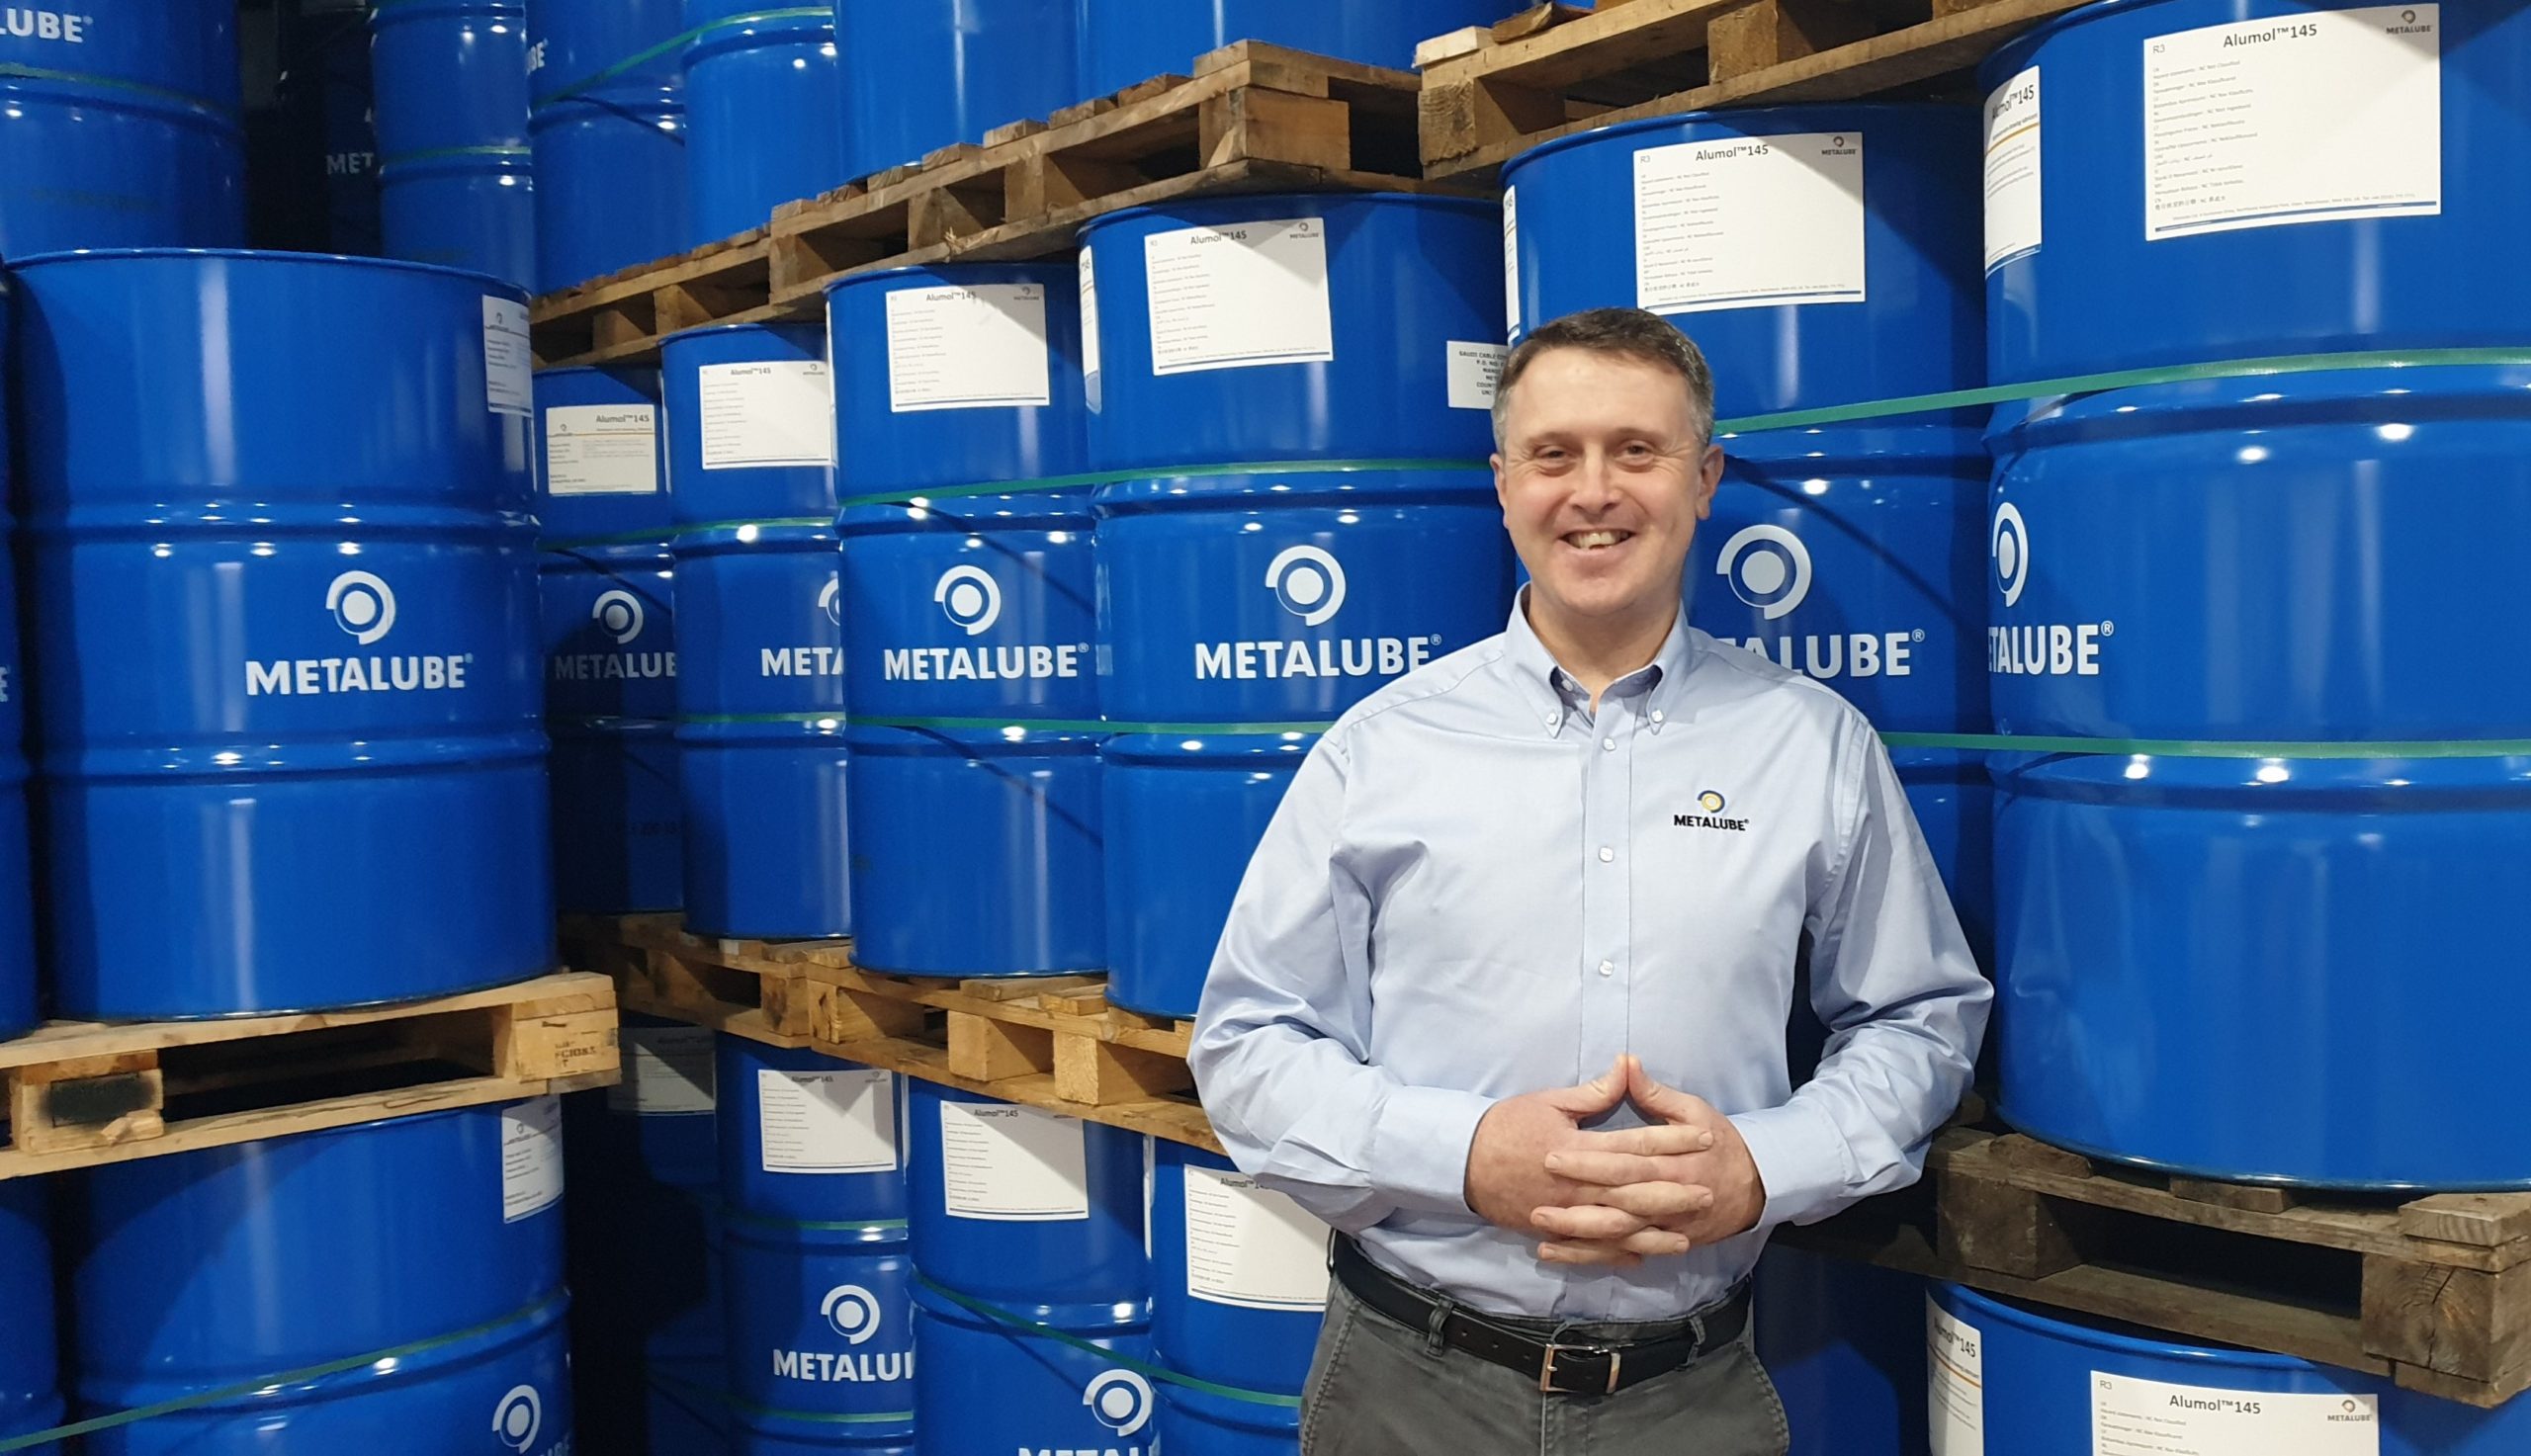 Matthew Buffin promoted to commercial manager